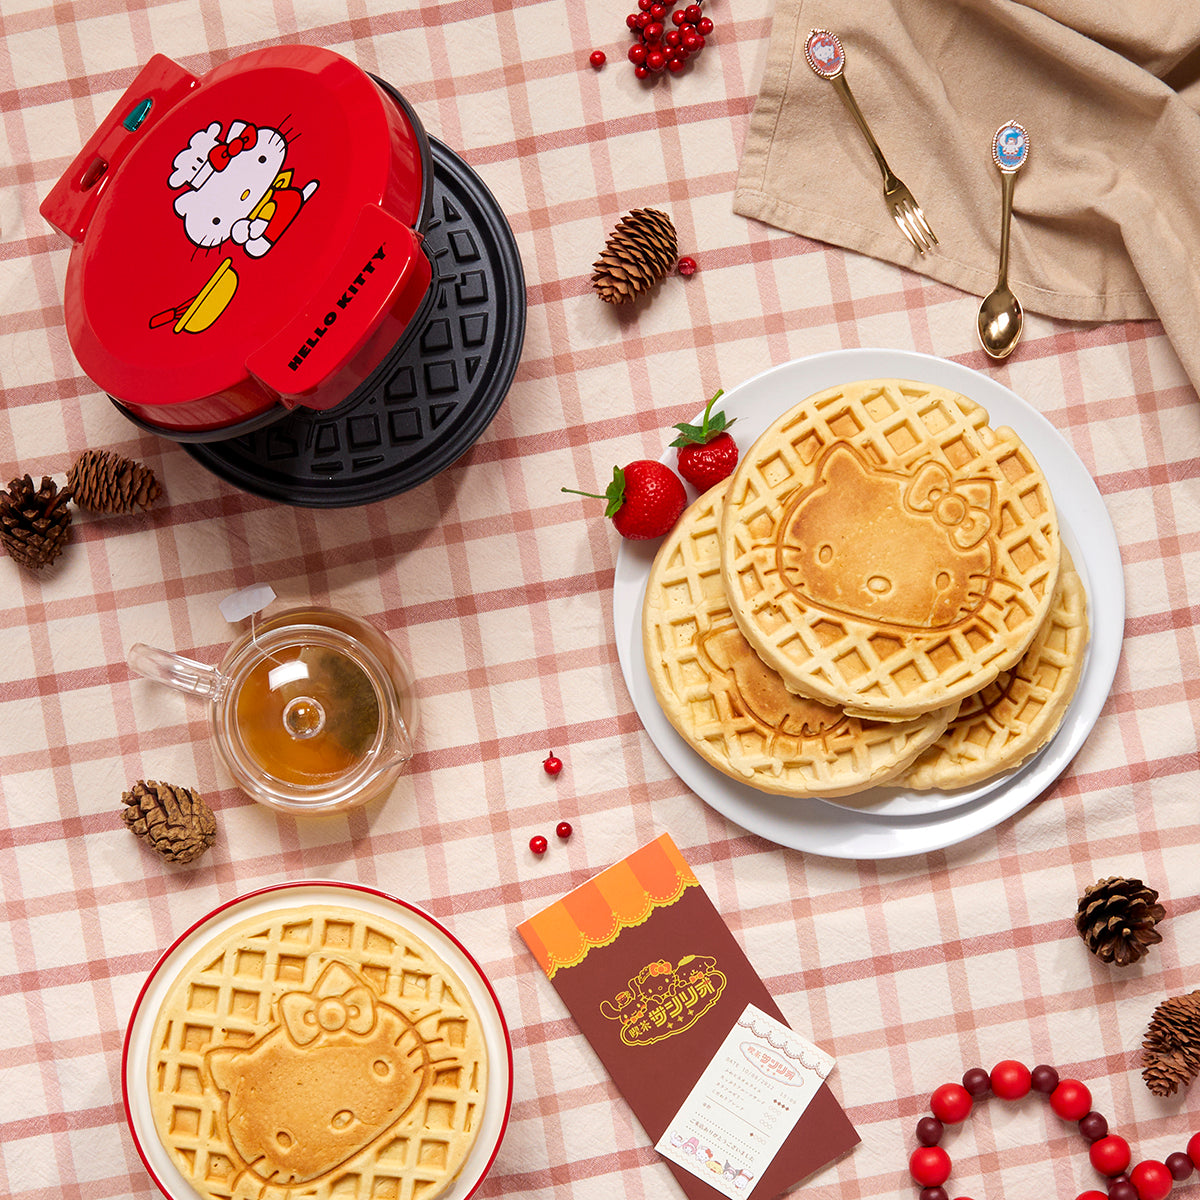 Hello Kitty Red Waffle Maker Home Goods Uncanny Brands LLC   